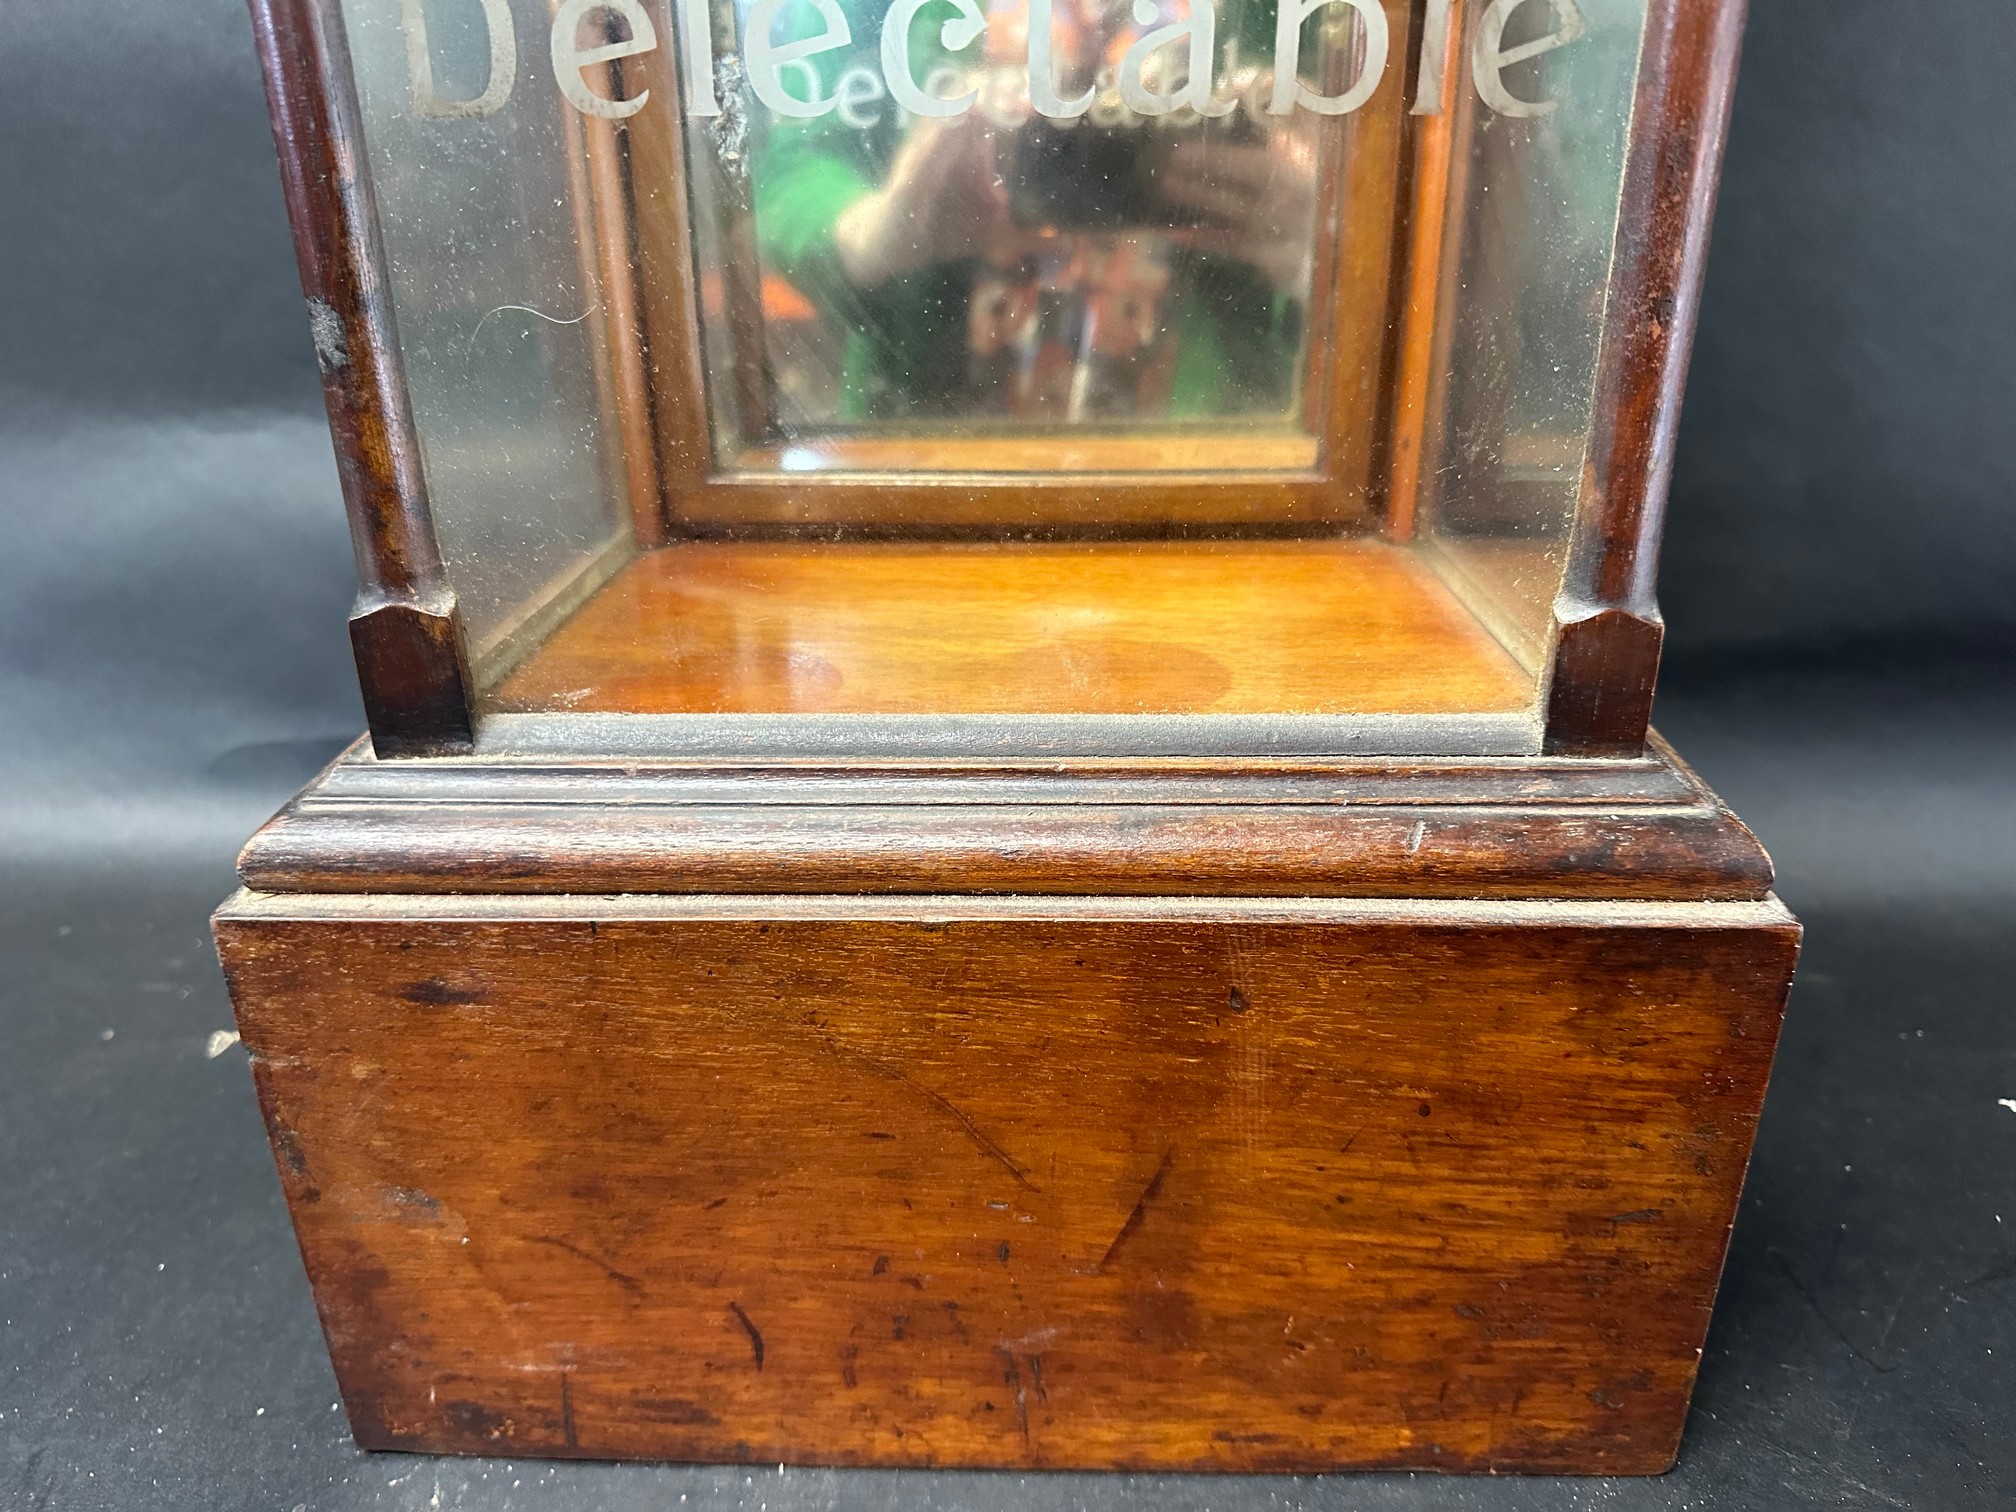 An Allen & Hanburys' Jujubes & Pastilles display cabinet with glass pediment and etched Voice, - Image 6 of 10